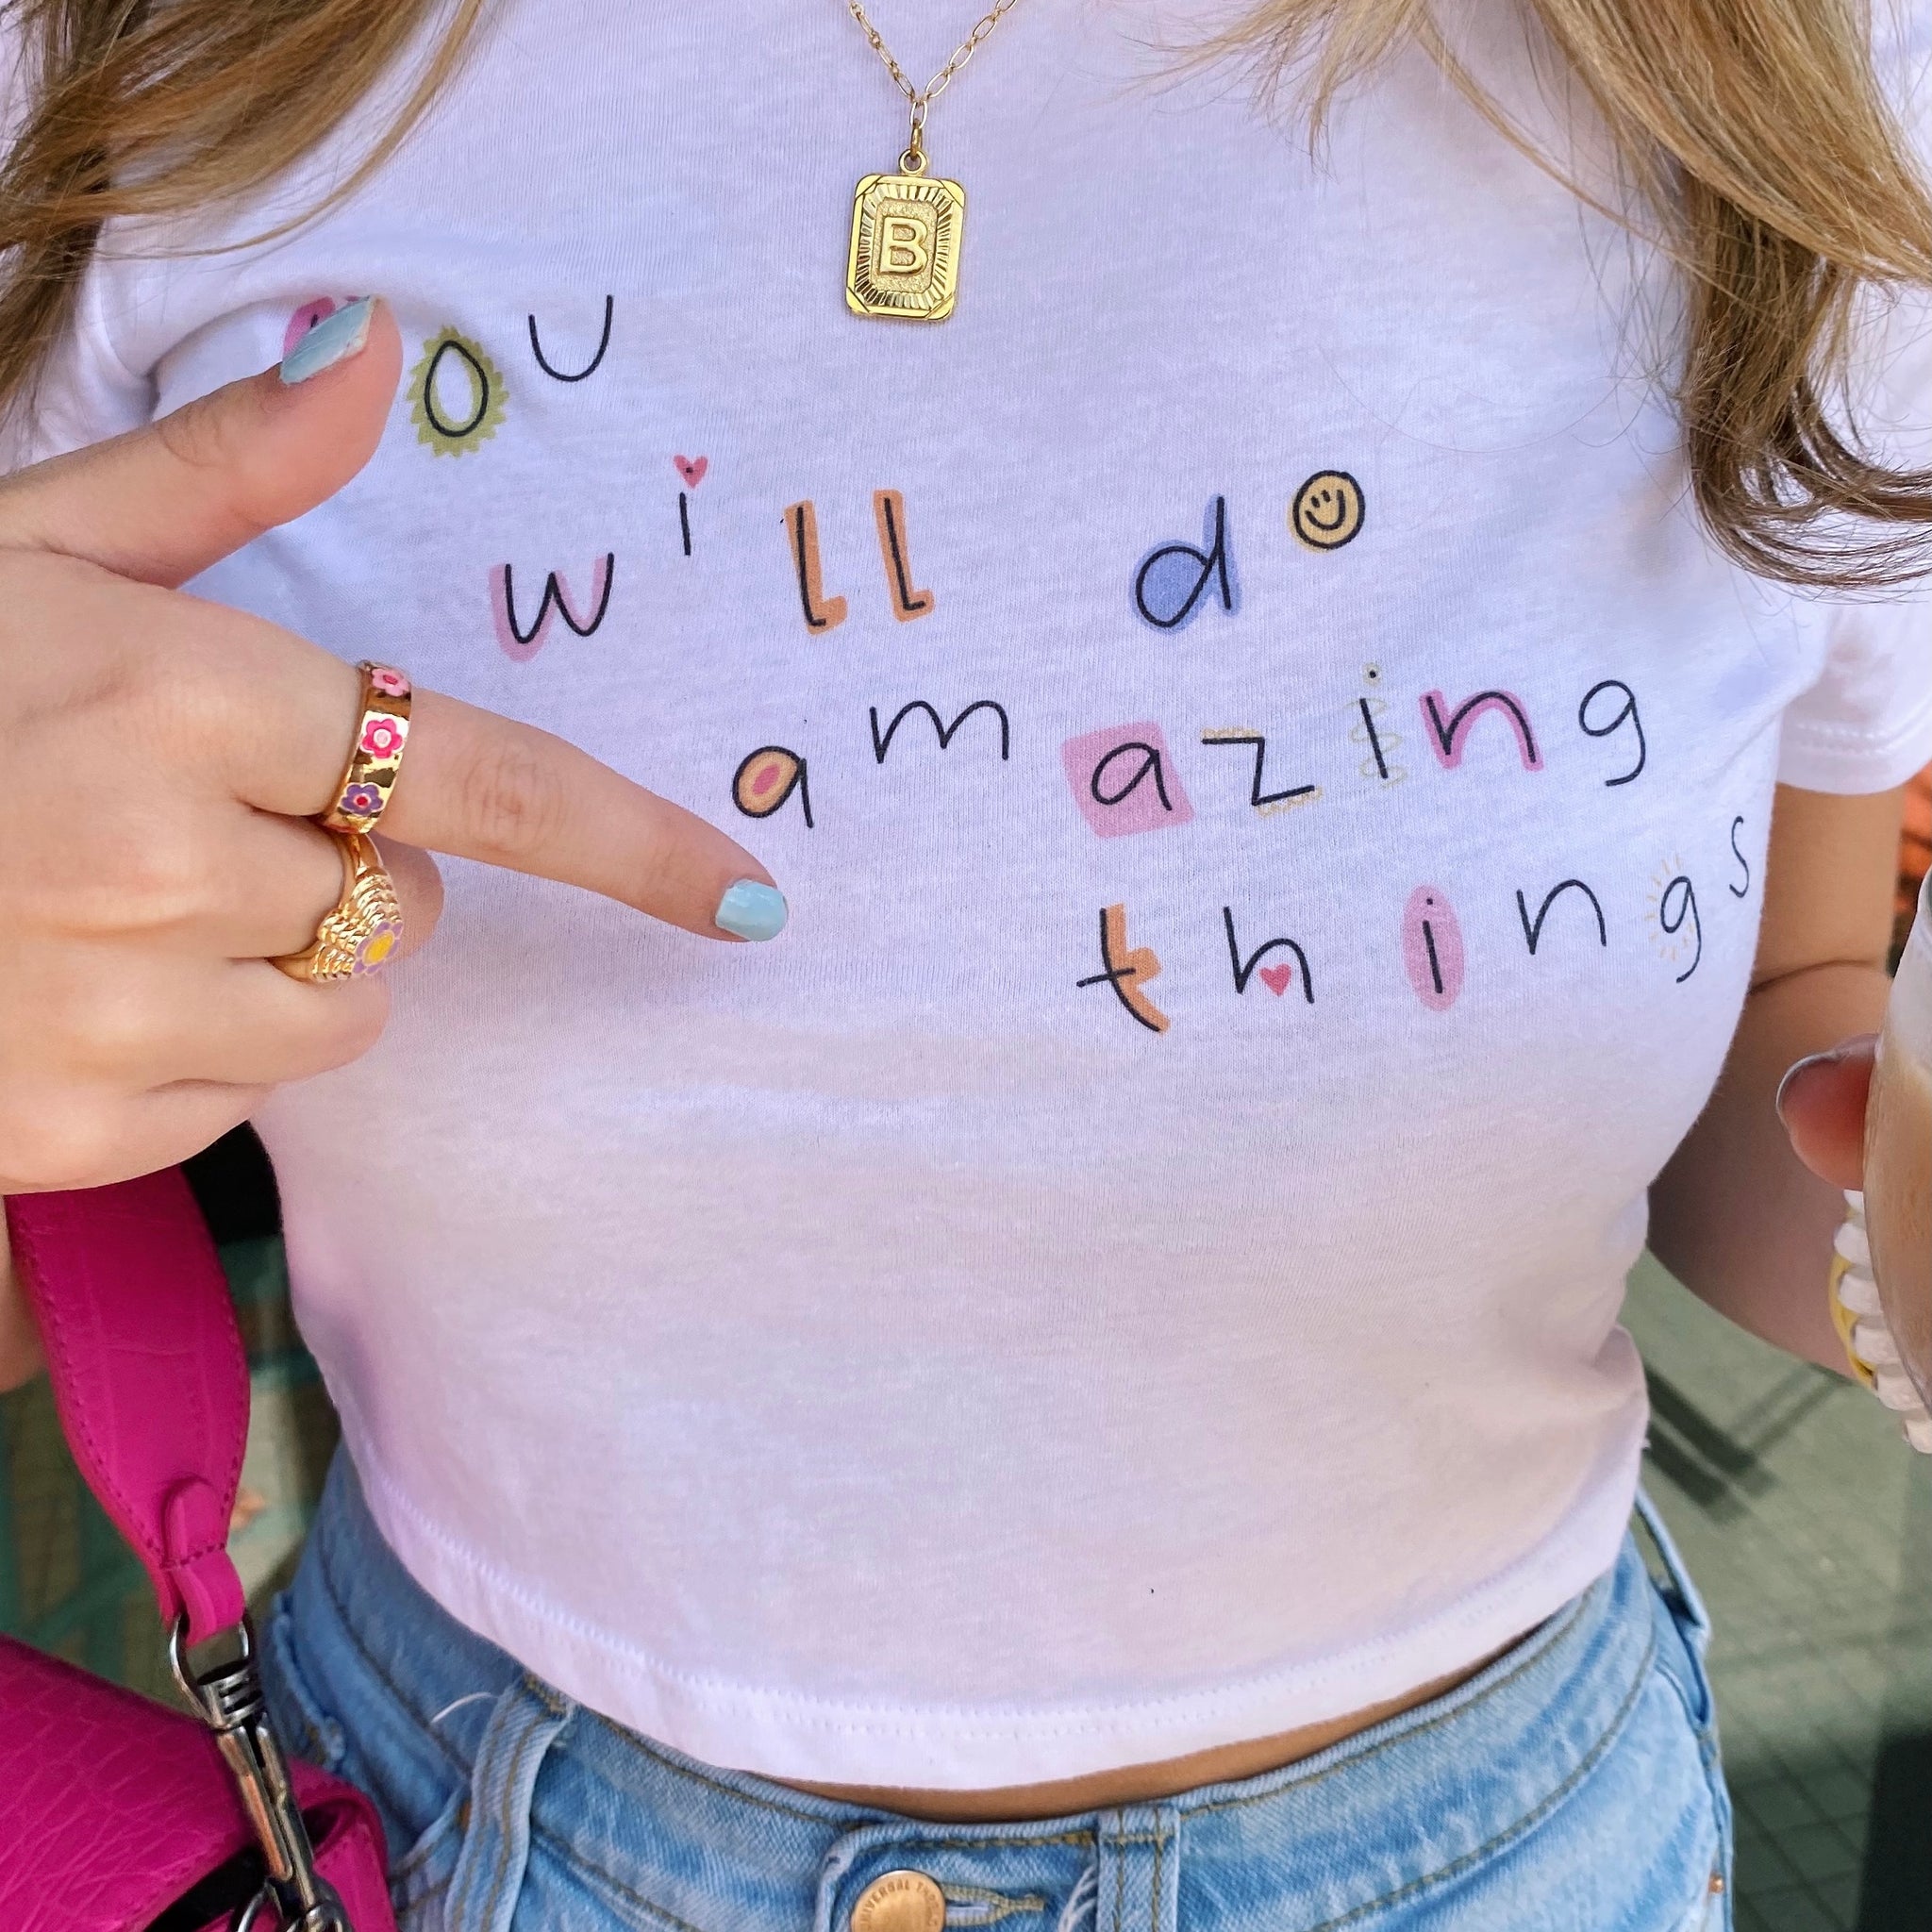 “YOU WILL DO AMAZING THINGS” BABY TEE